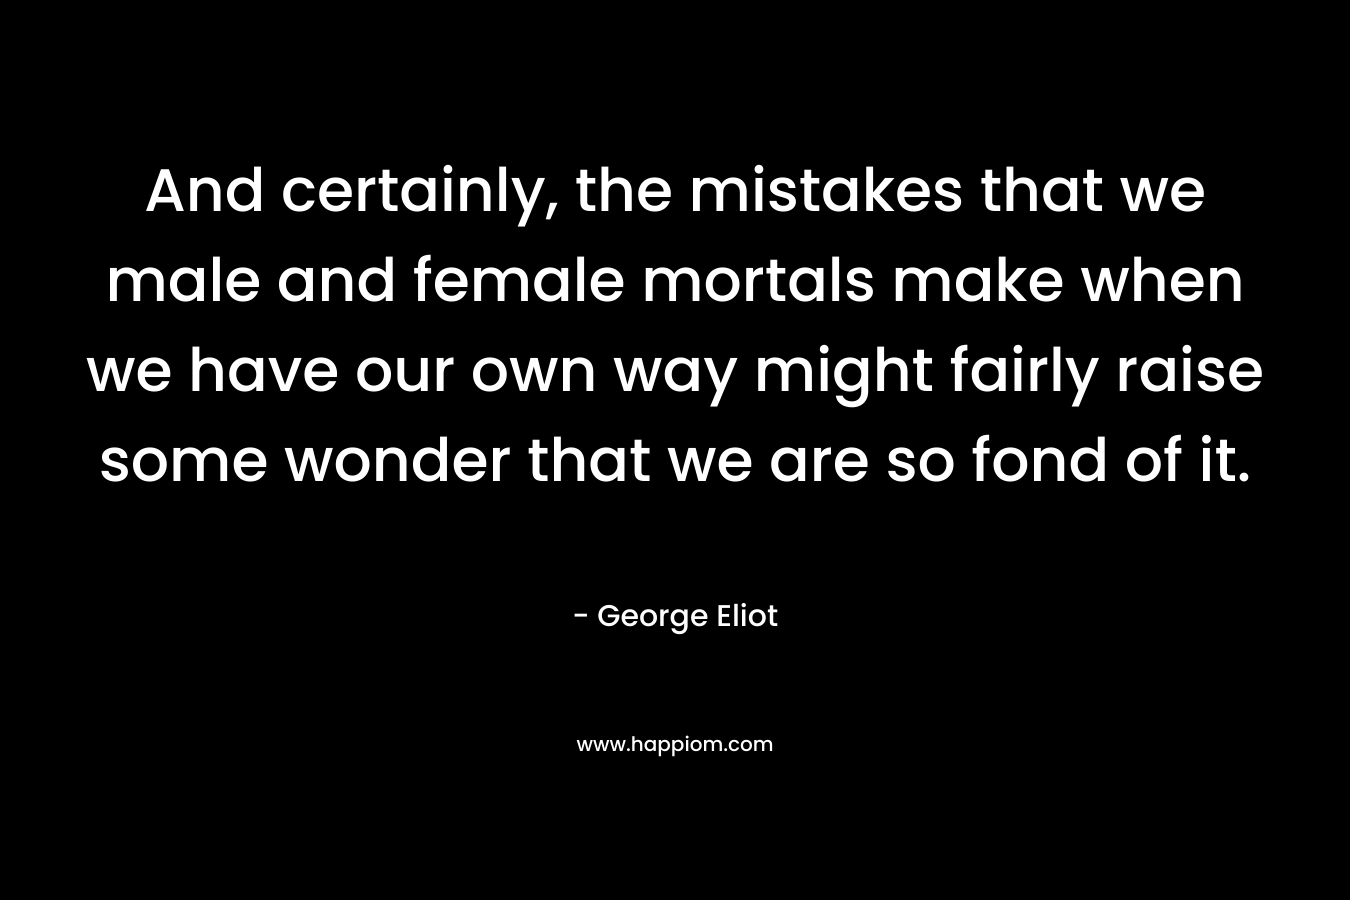 And certainly, the mistakes that we male and female mortals make when we have our own way might fairly raise some wonder that we are so fond of it.